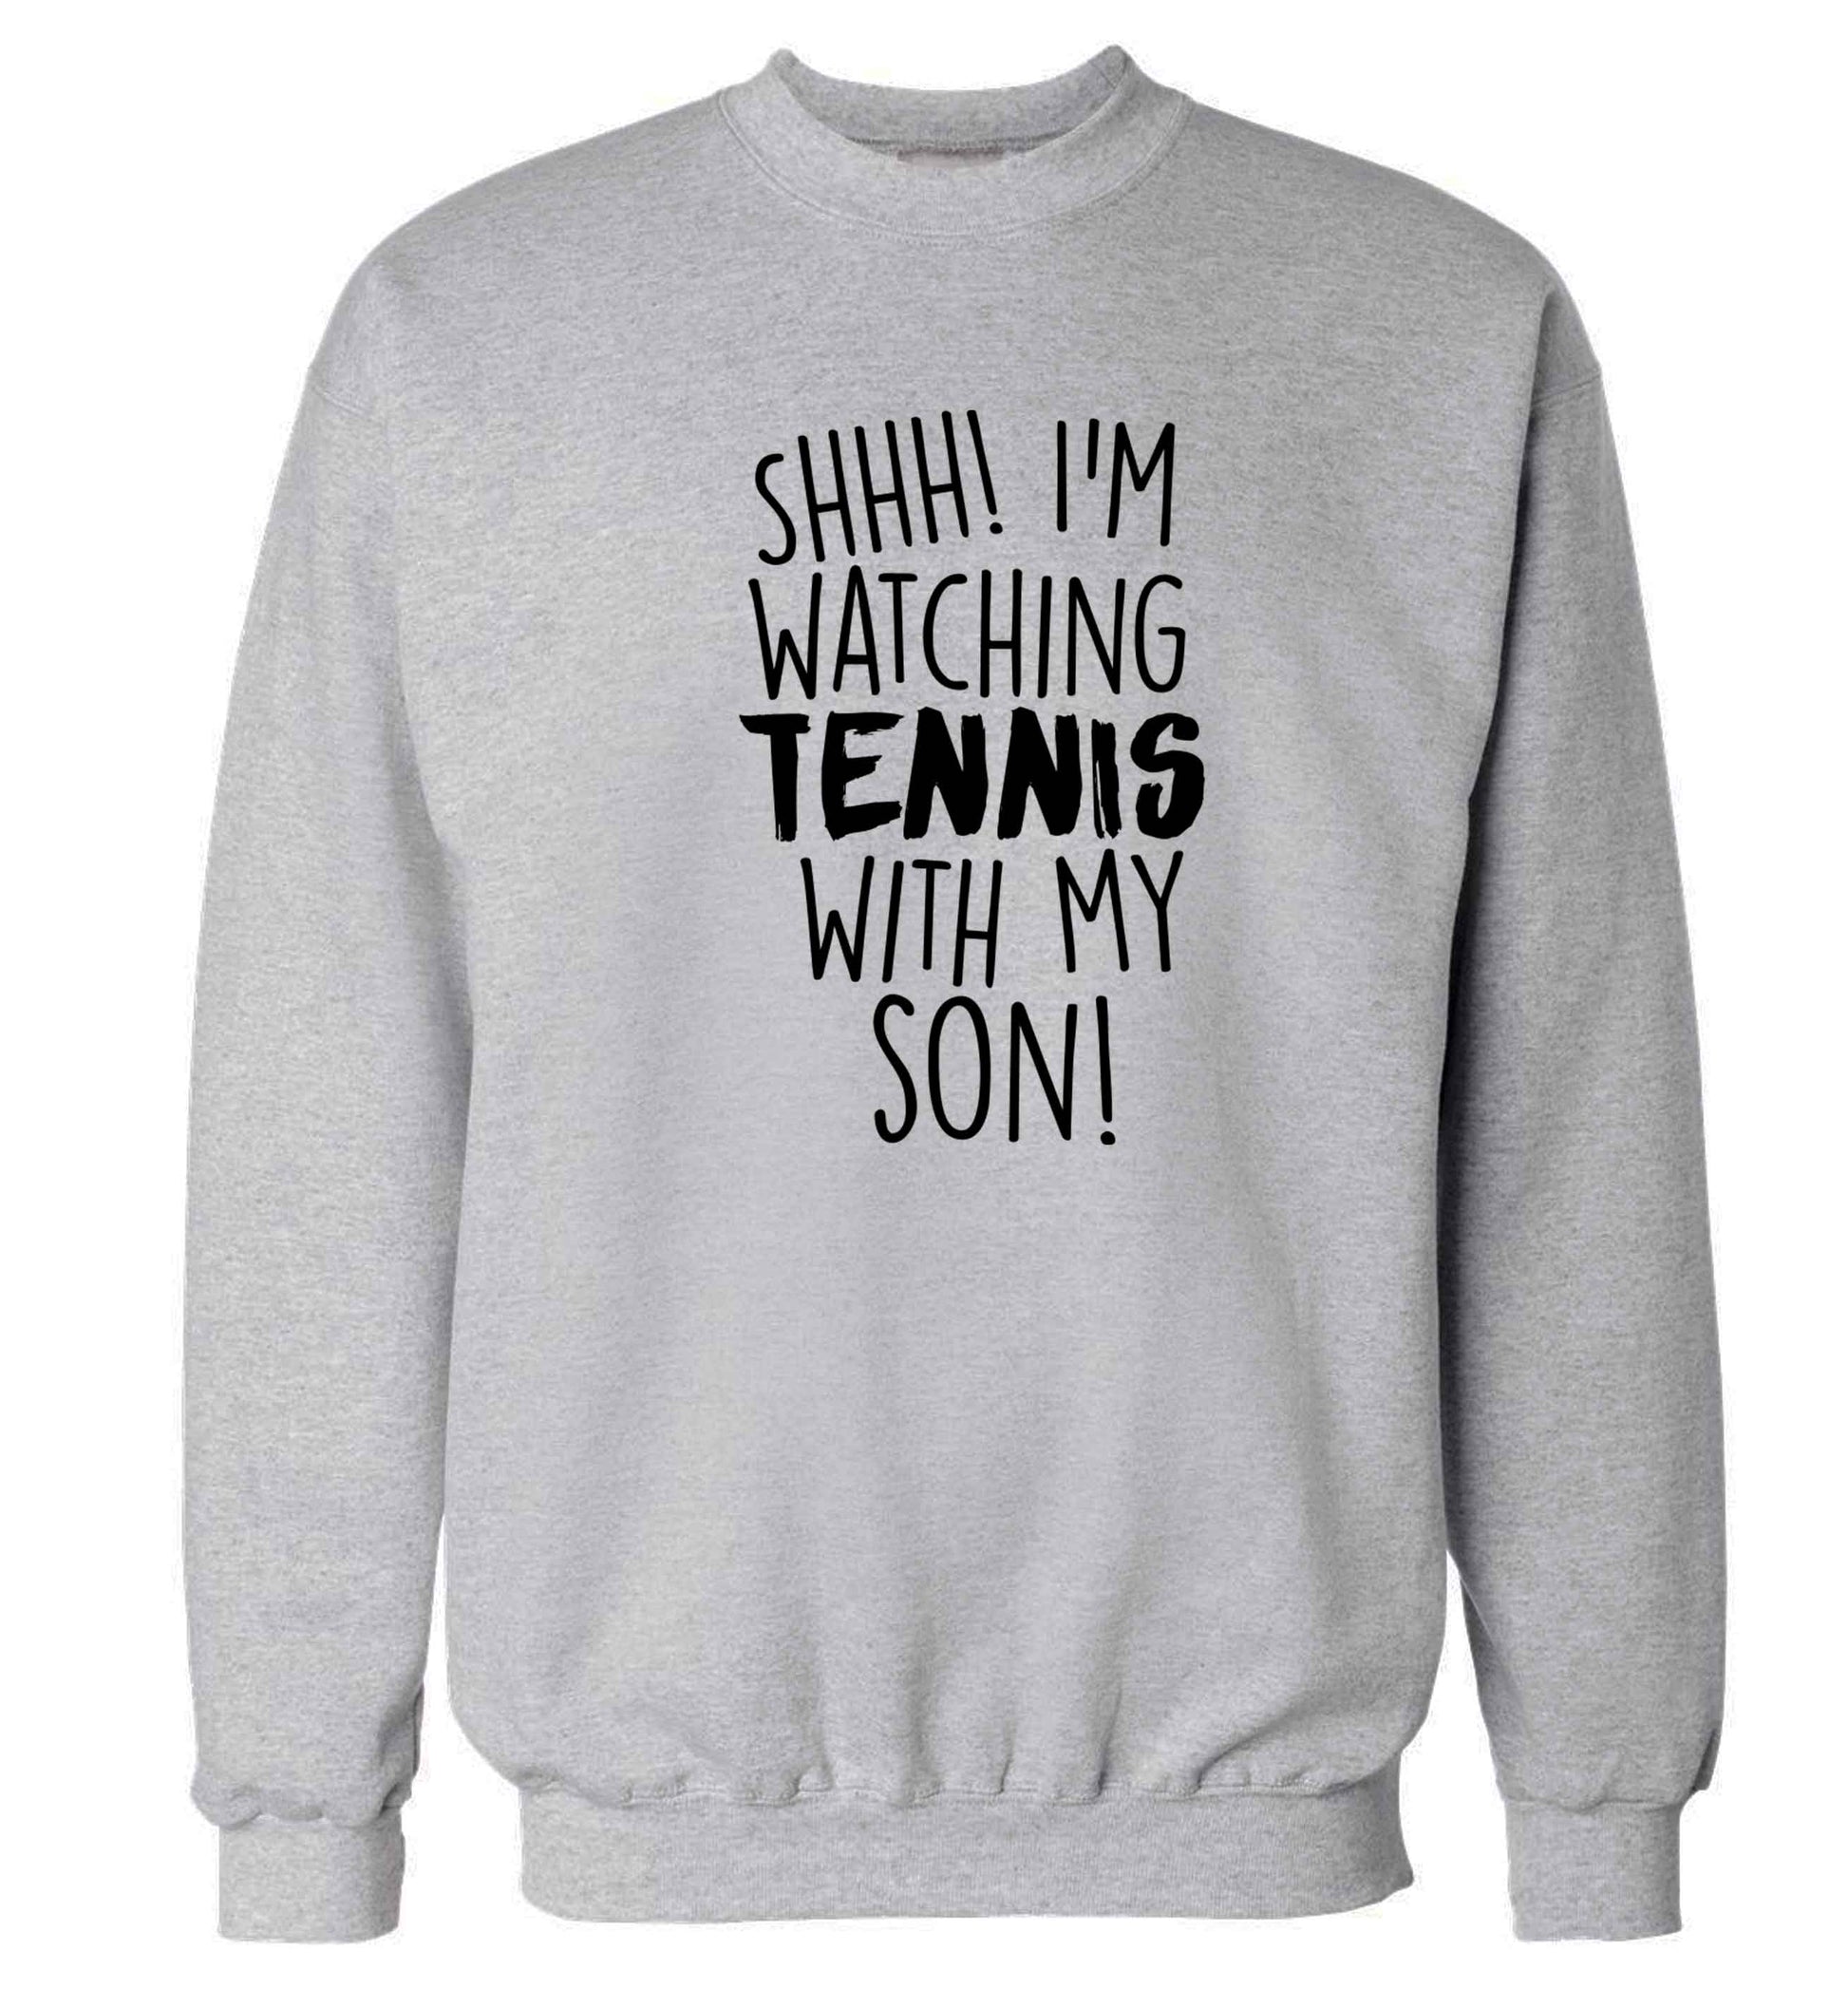 Shh! I'm watching tennis with my son! Adult's unisex grey Sweater 2XL